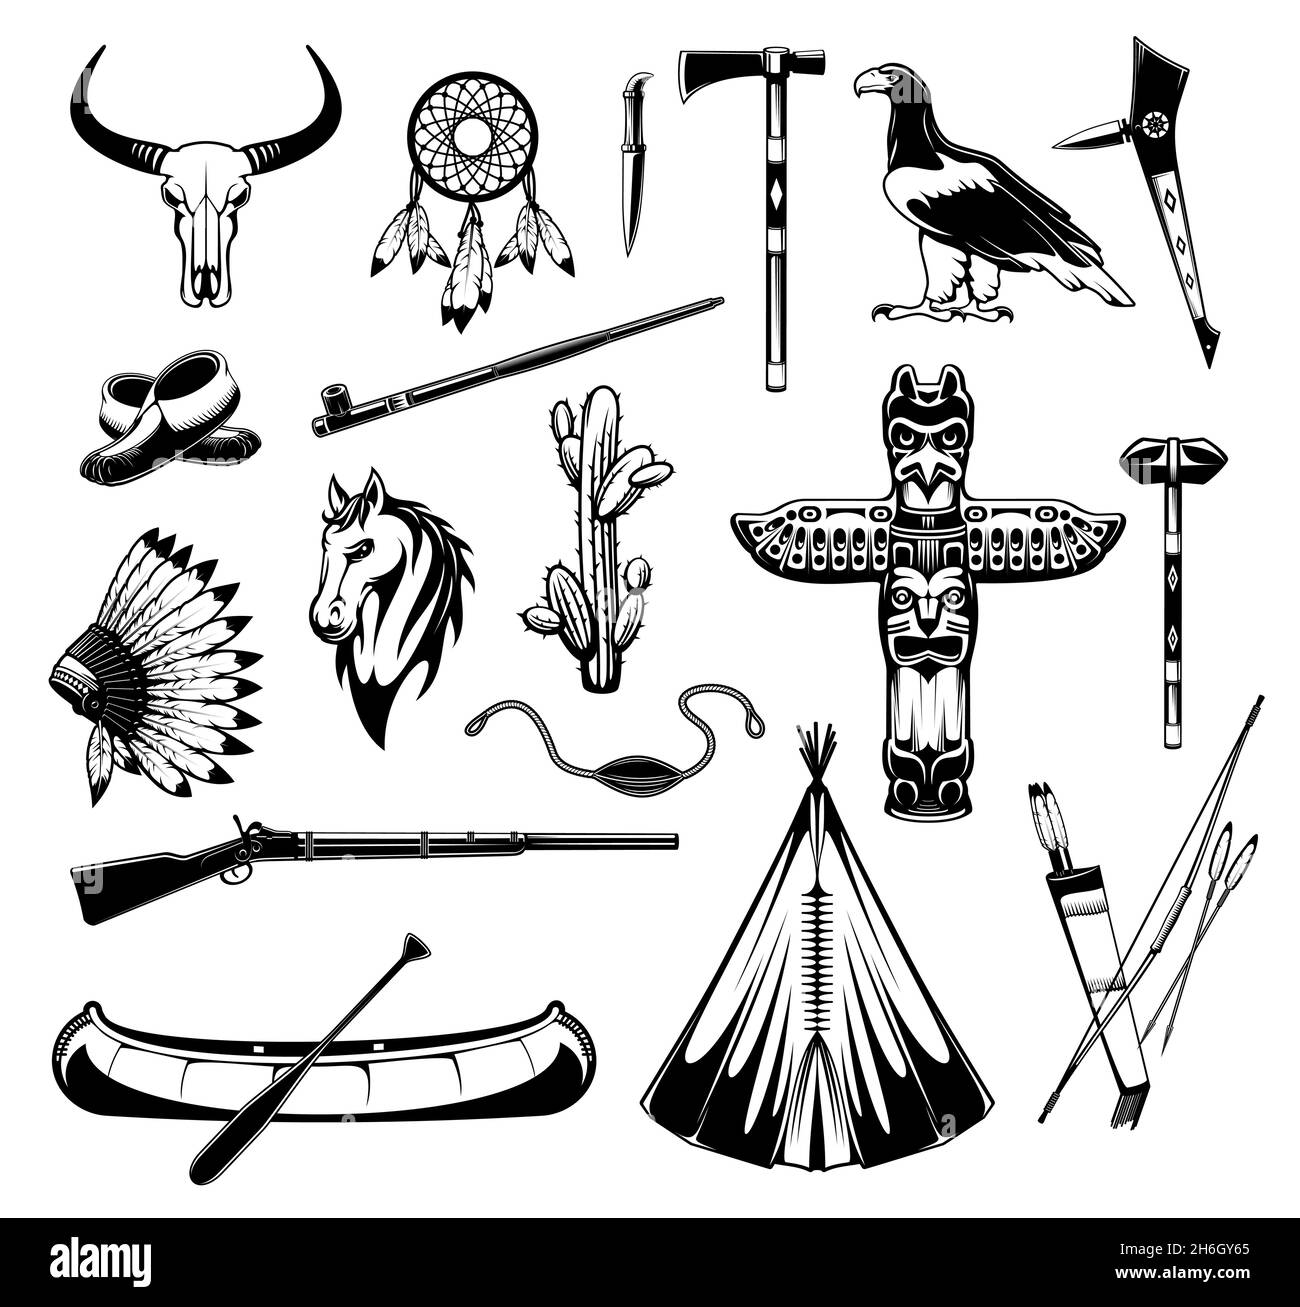 Native American Indians items and weapon icons, vector tribal symbols. American Indian tomahawk and canoe boat, Apache chief feather headdress and tot Stock Vector